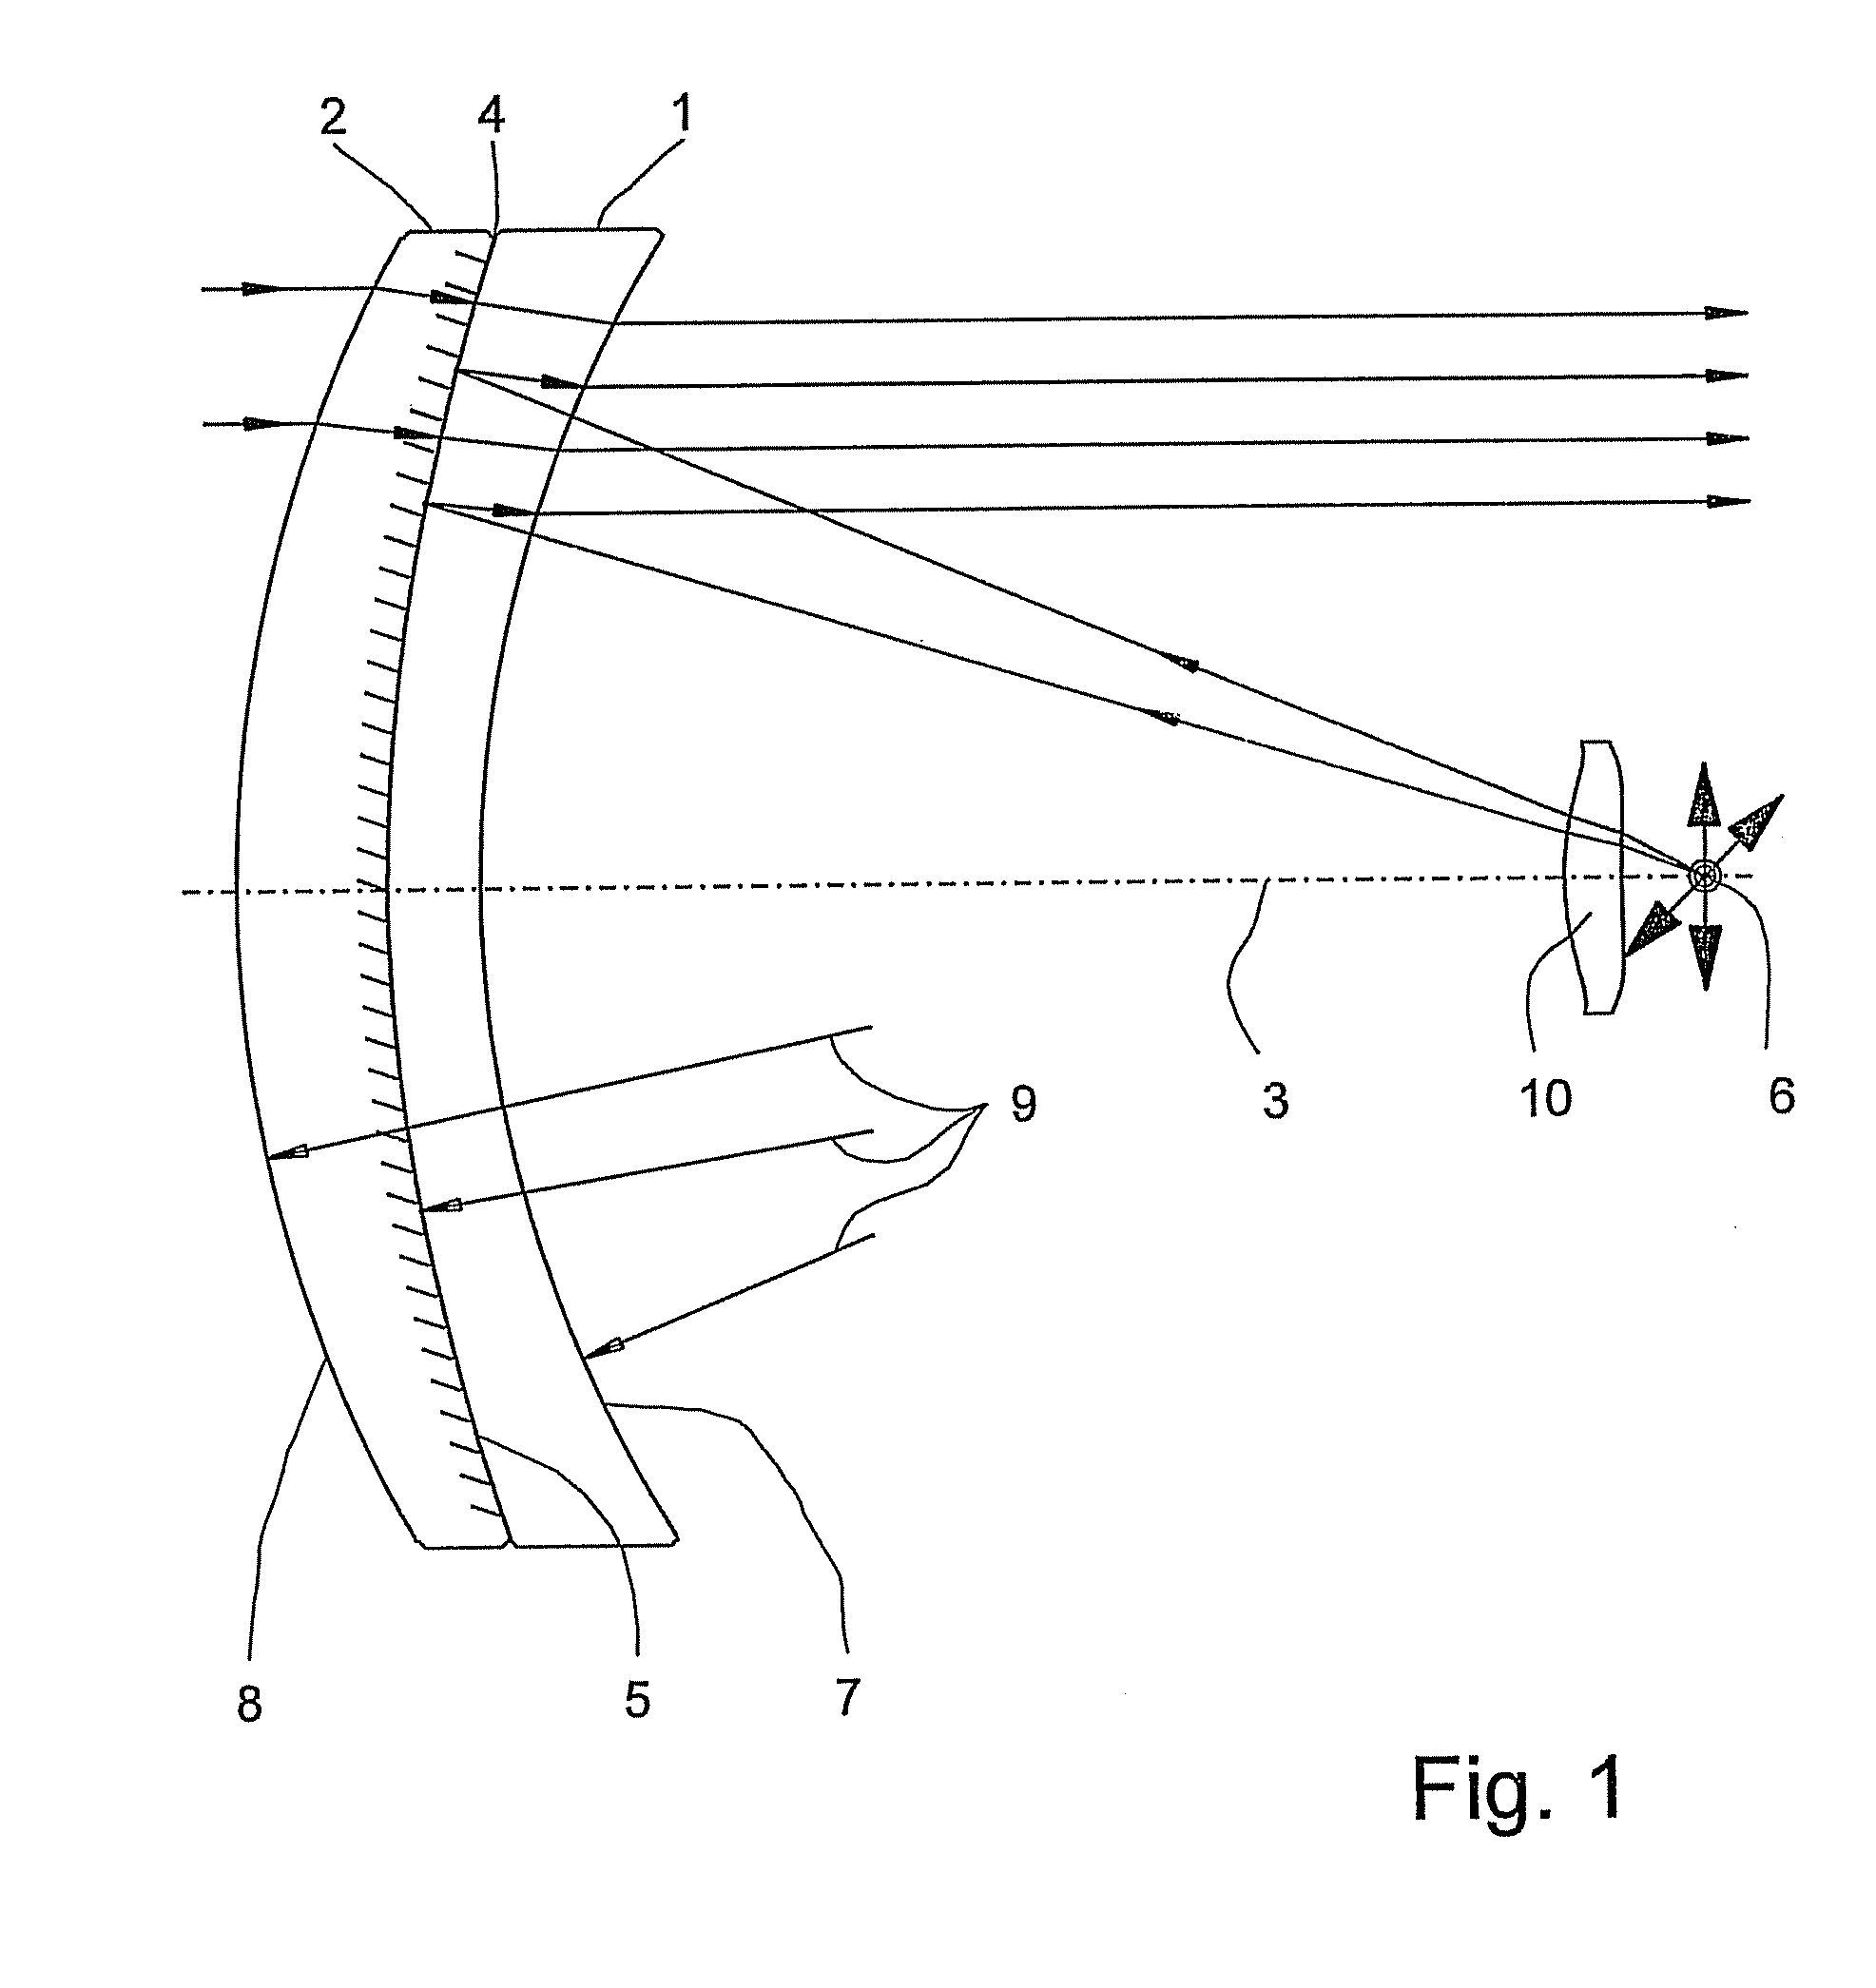 Coaxially arranged, off-axis optical system for a sighting device or aiming device